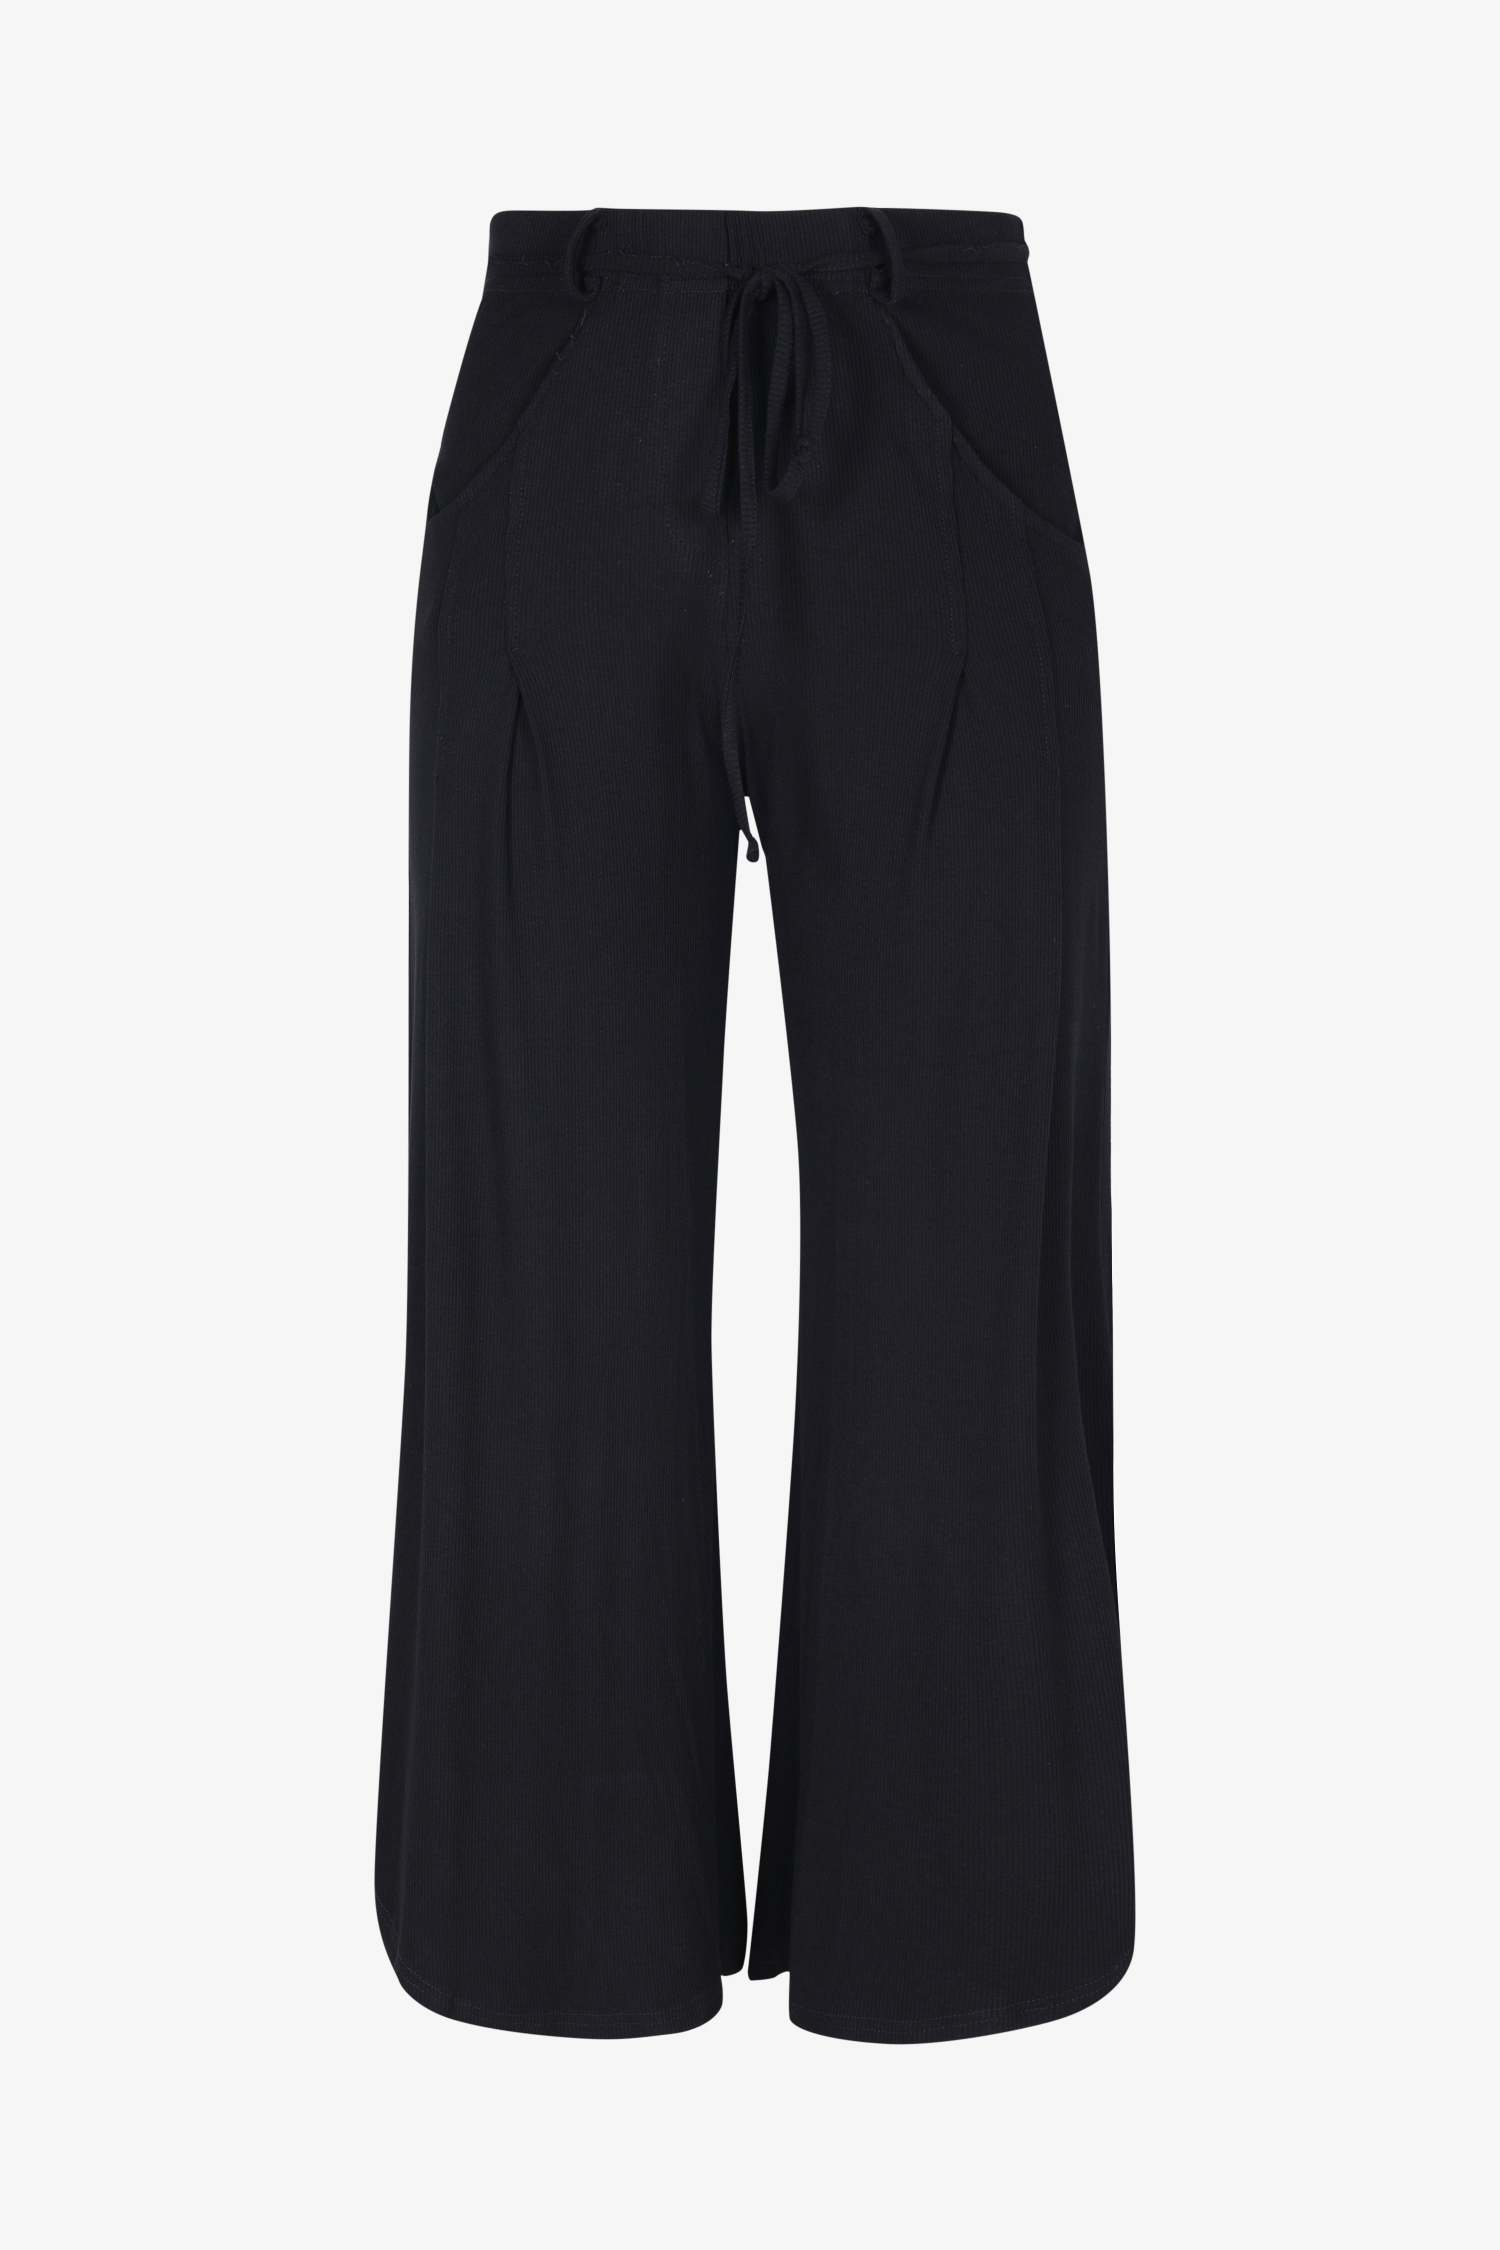 Plain knit culotte-style trousers with small ribs